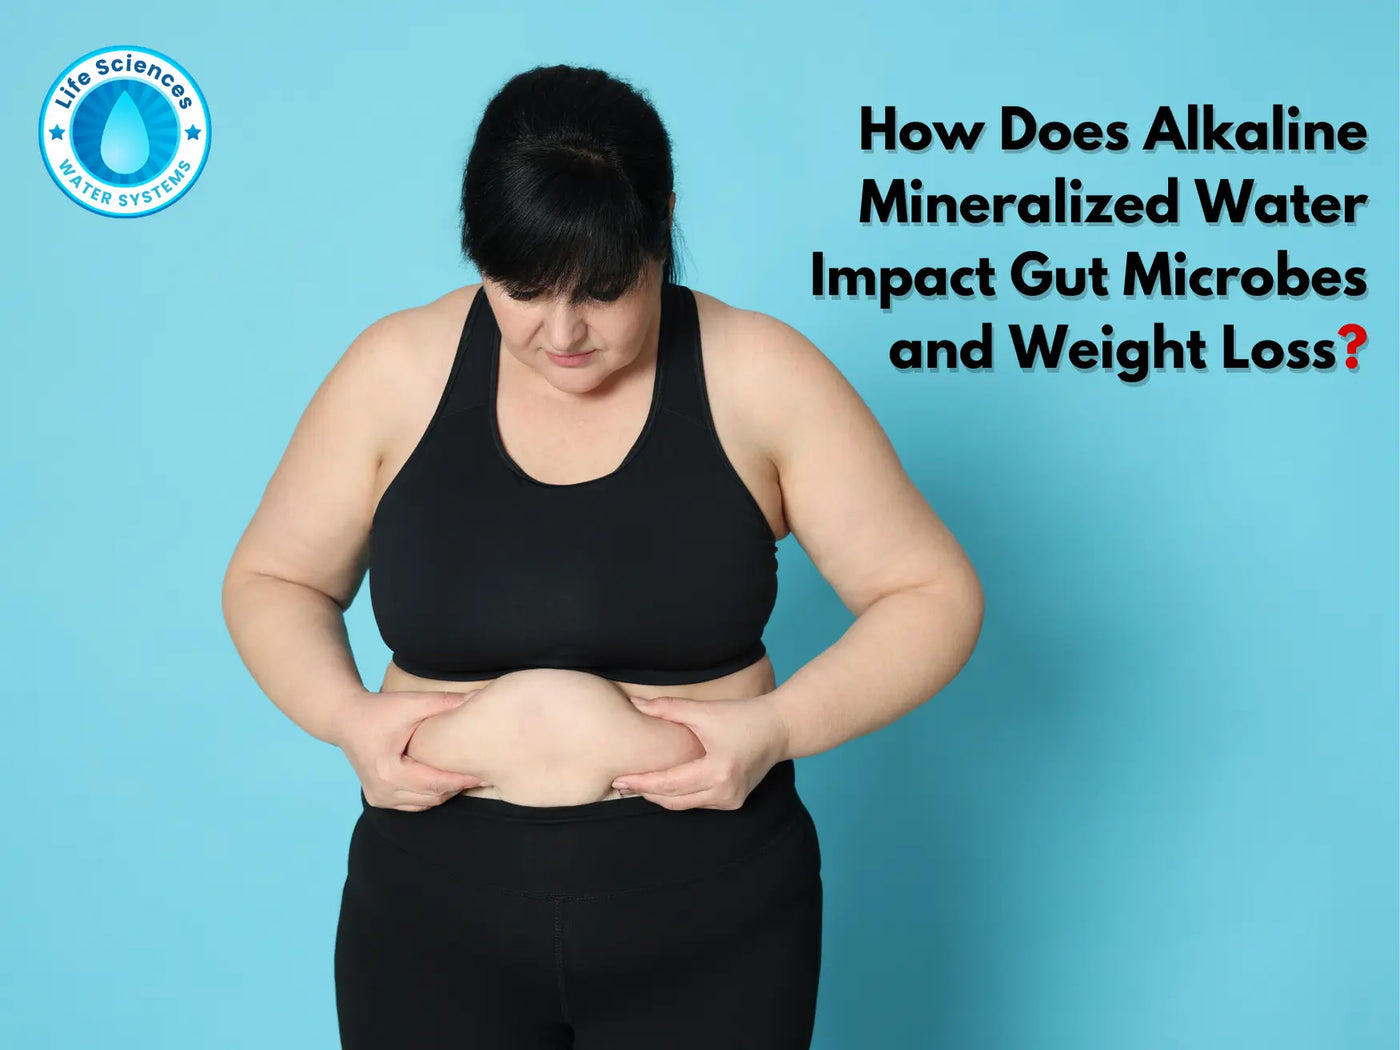 How Does Alkaline Mineralized Water Impact Gut Microbes and Weight Loss?